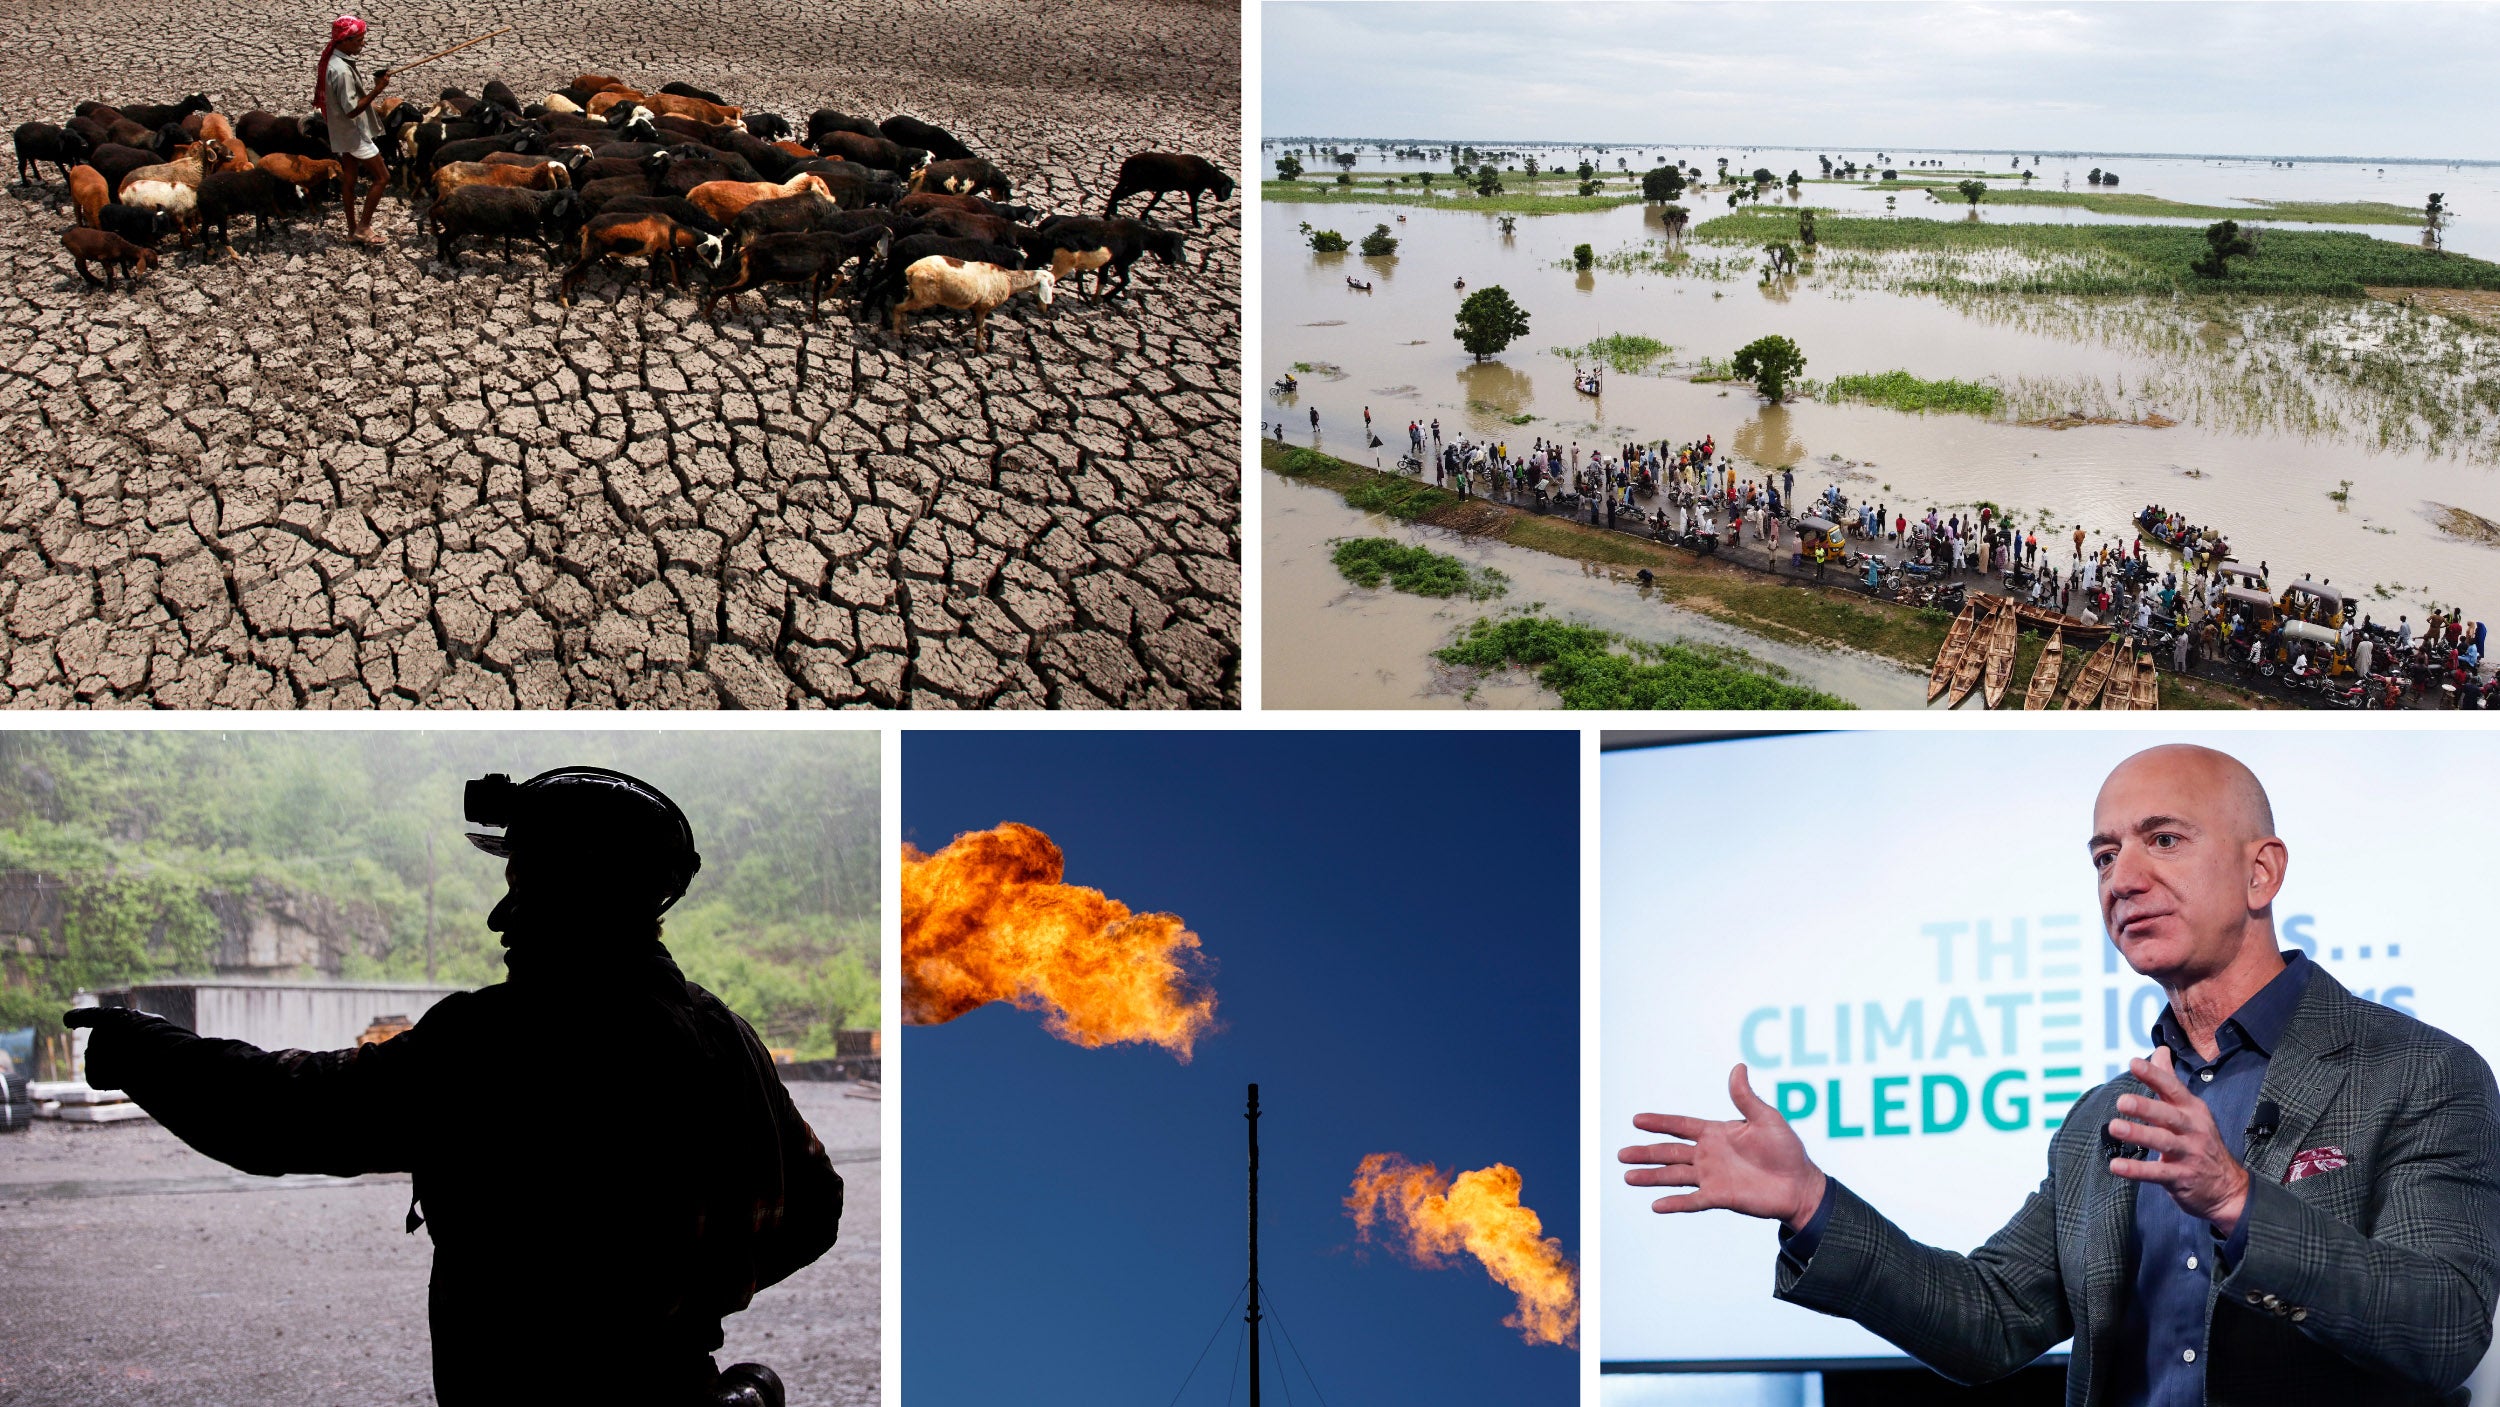 Drought in India; flooding in Nigeria; Jeff Bezos announces climate pledge; flares burn off methane; coal miner.